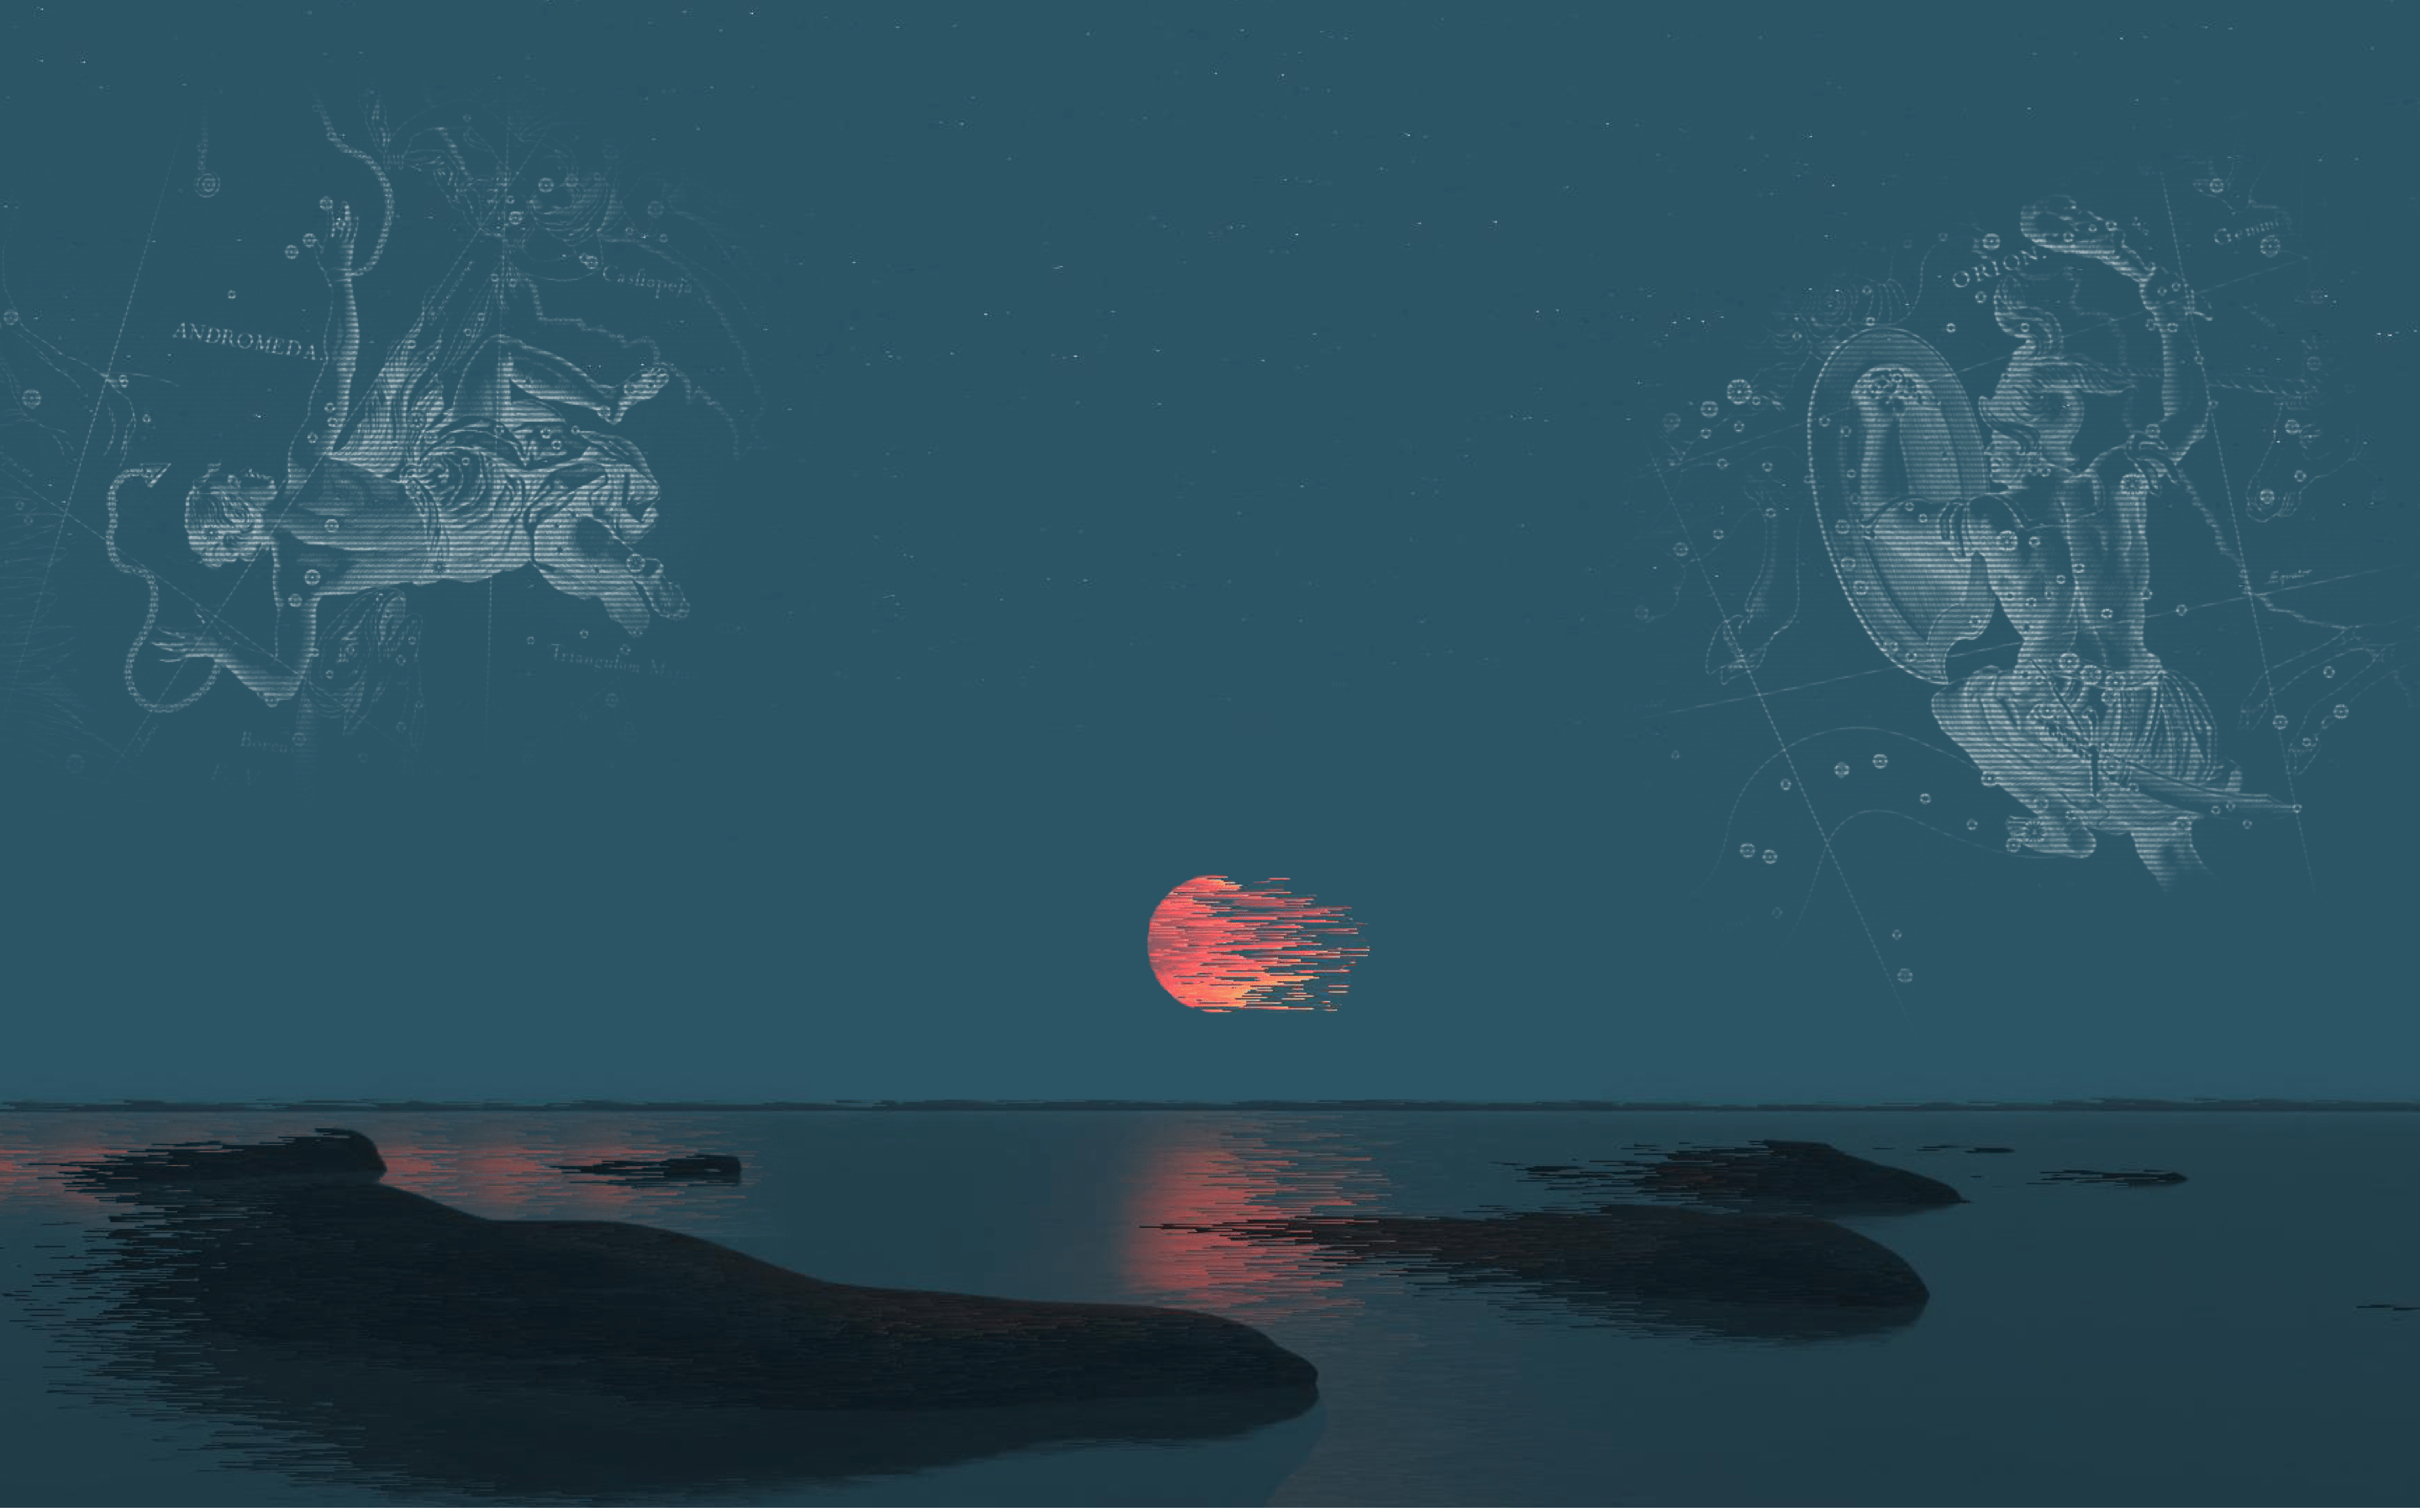 A red sun is sinking into the sea, with a zodiac chart on the right. - Computer, landscape, scenery